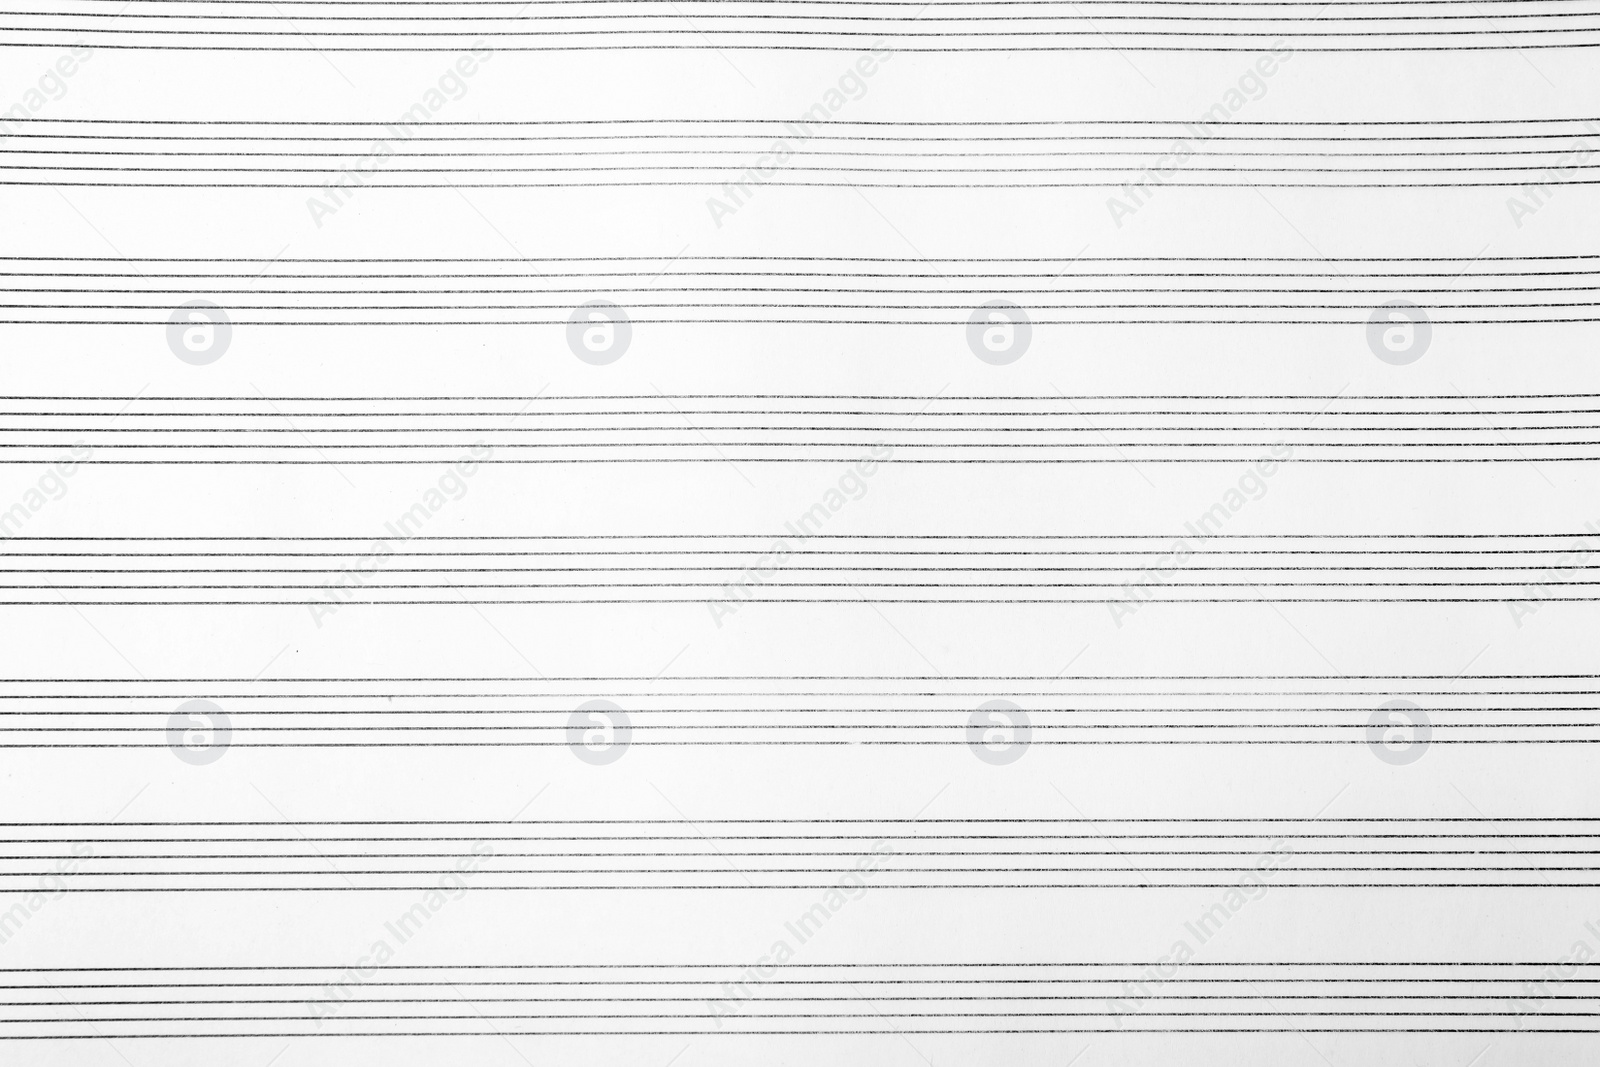 Photo of Paper with empty staves for music notes as background, top view